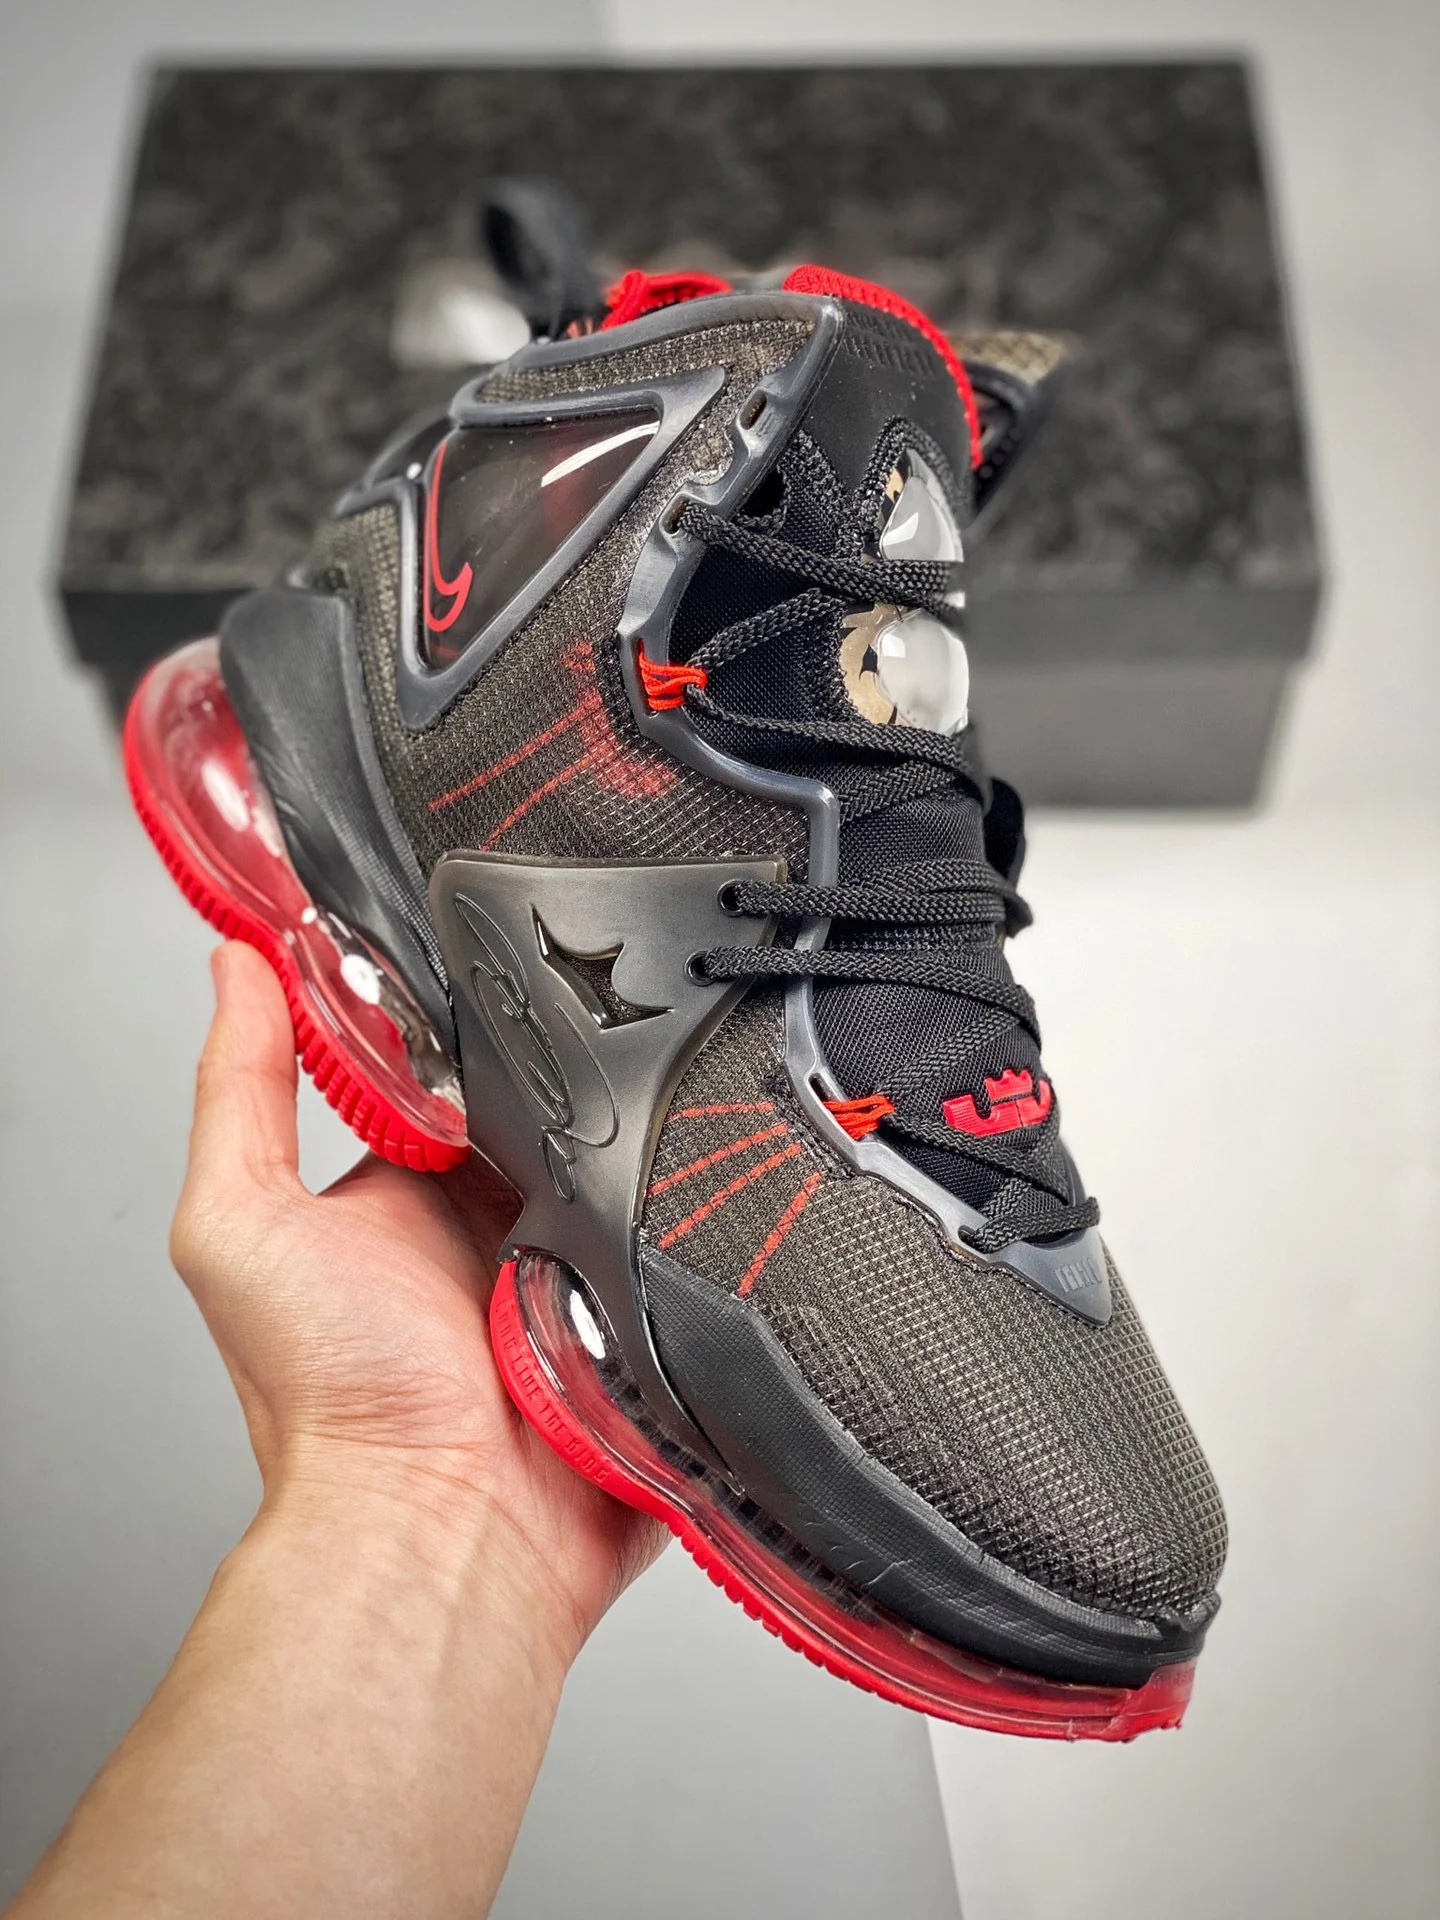 Nike LeBron 19 Bred Black Red DC9340-001 For Sale